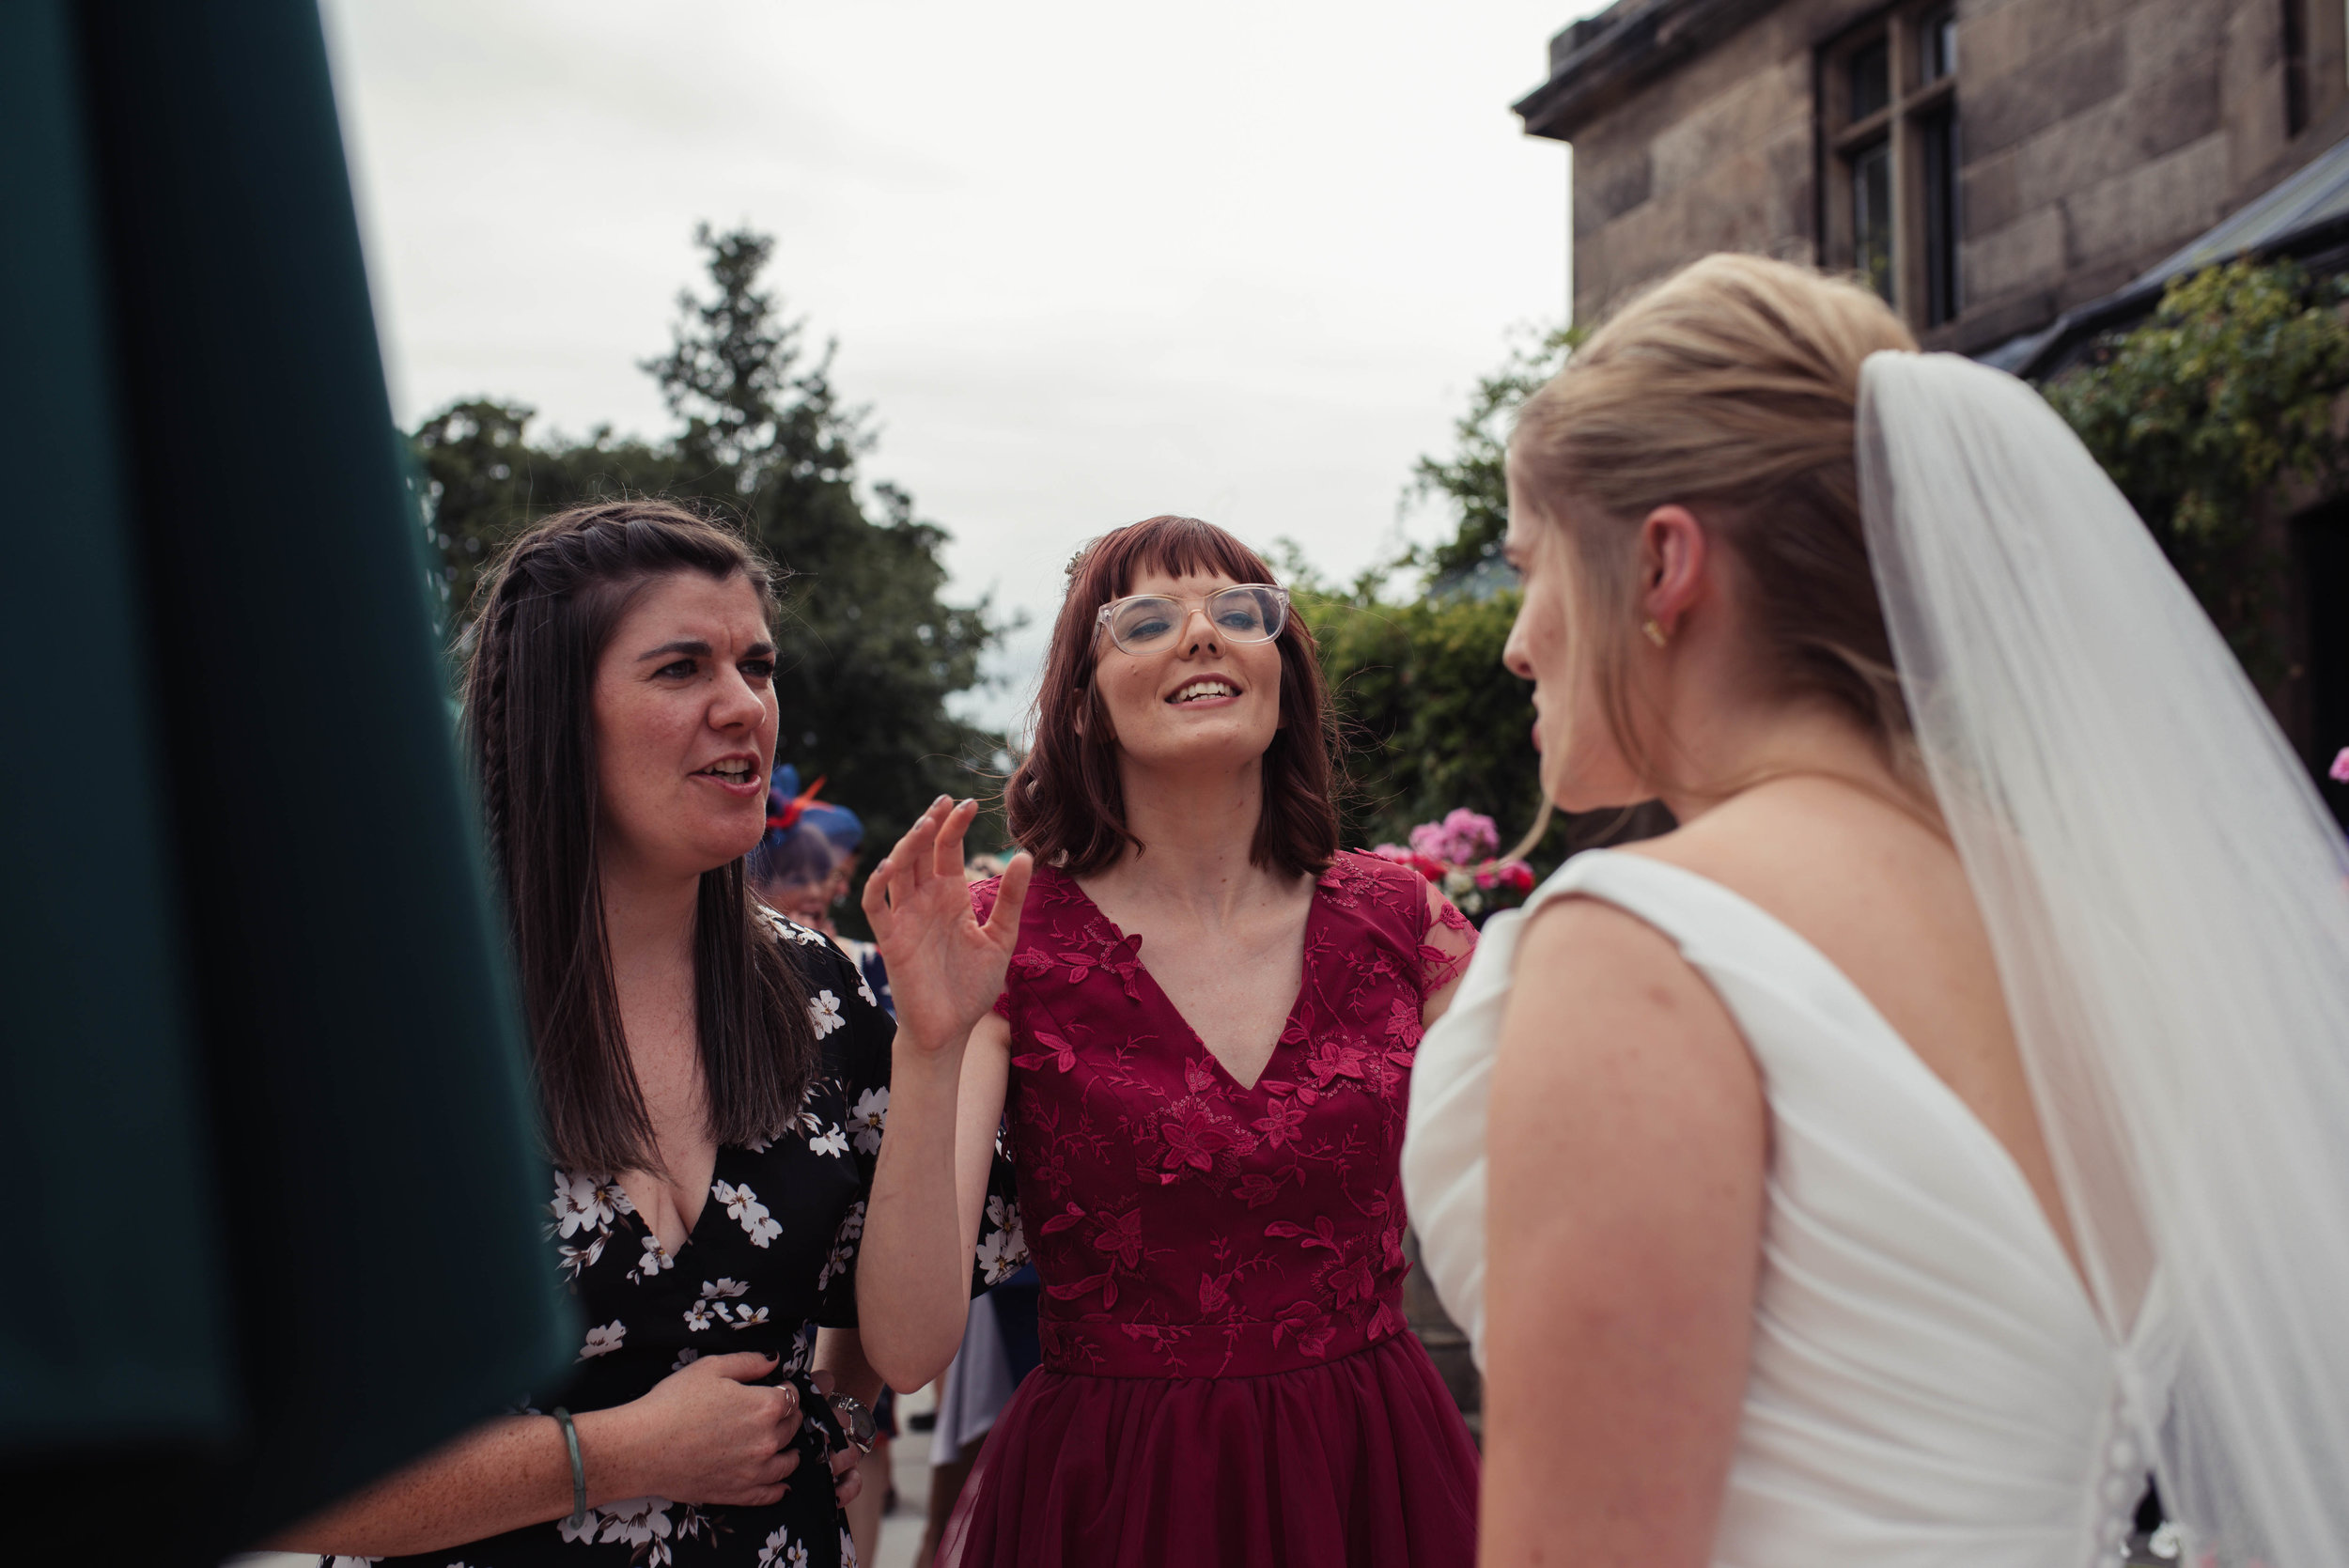 A bridesmaid has a laugh with the bride outside rookery hall